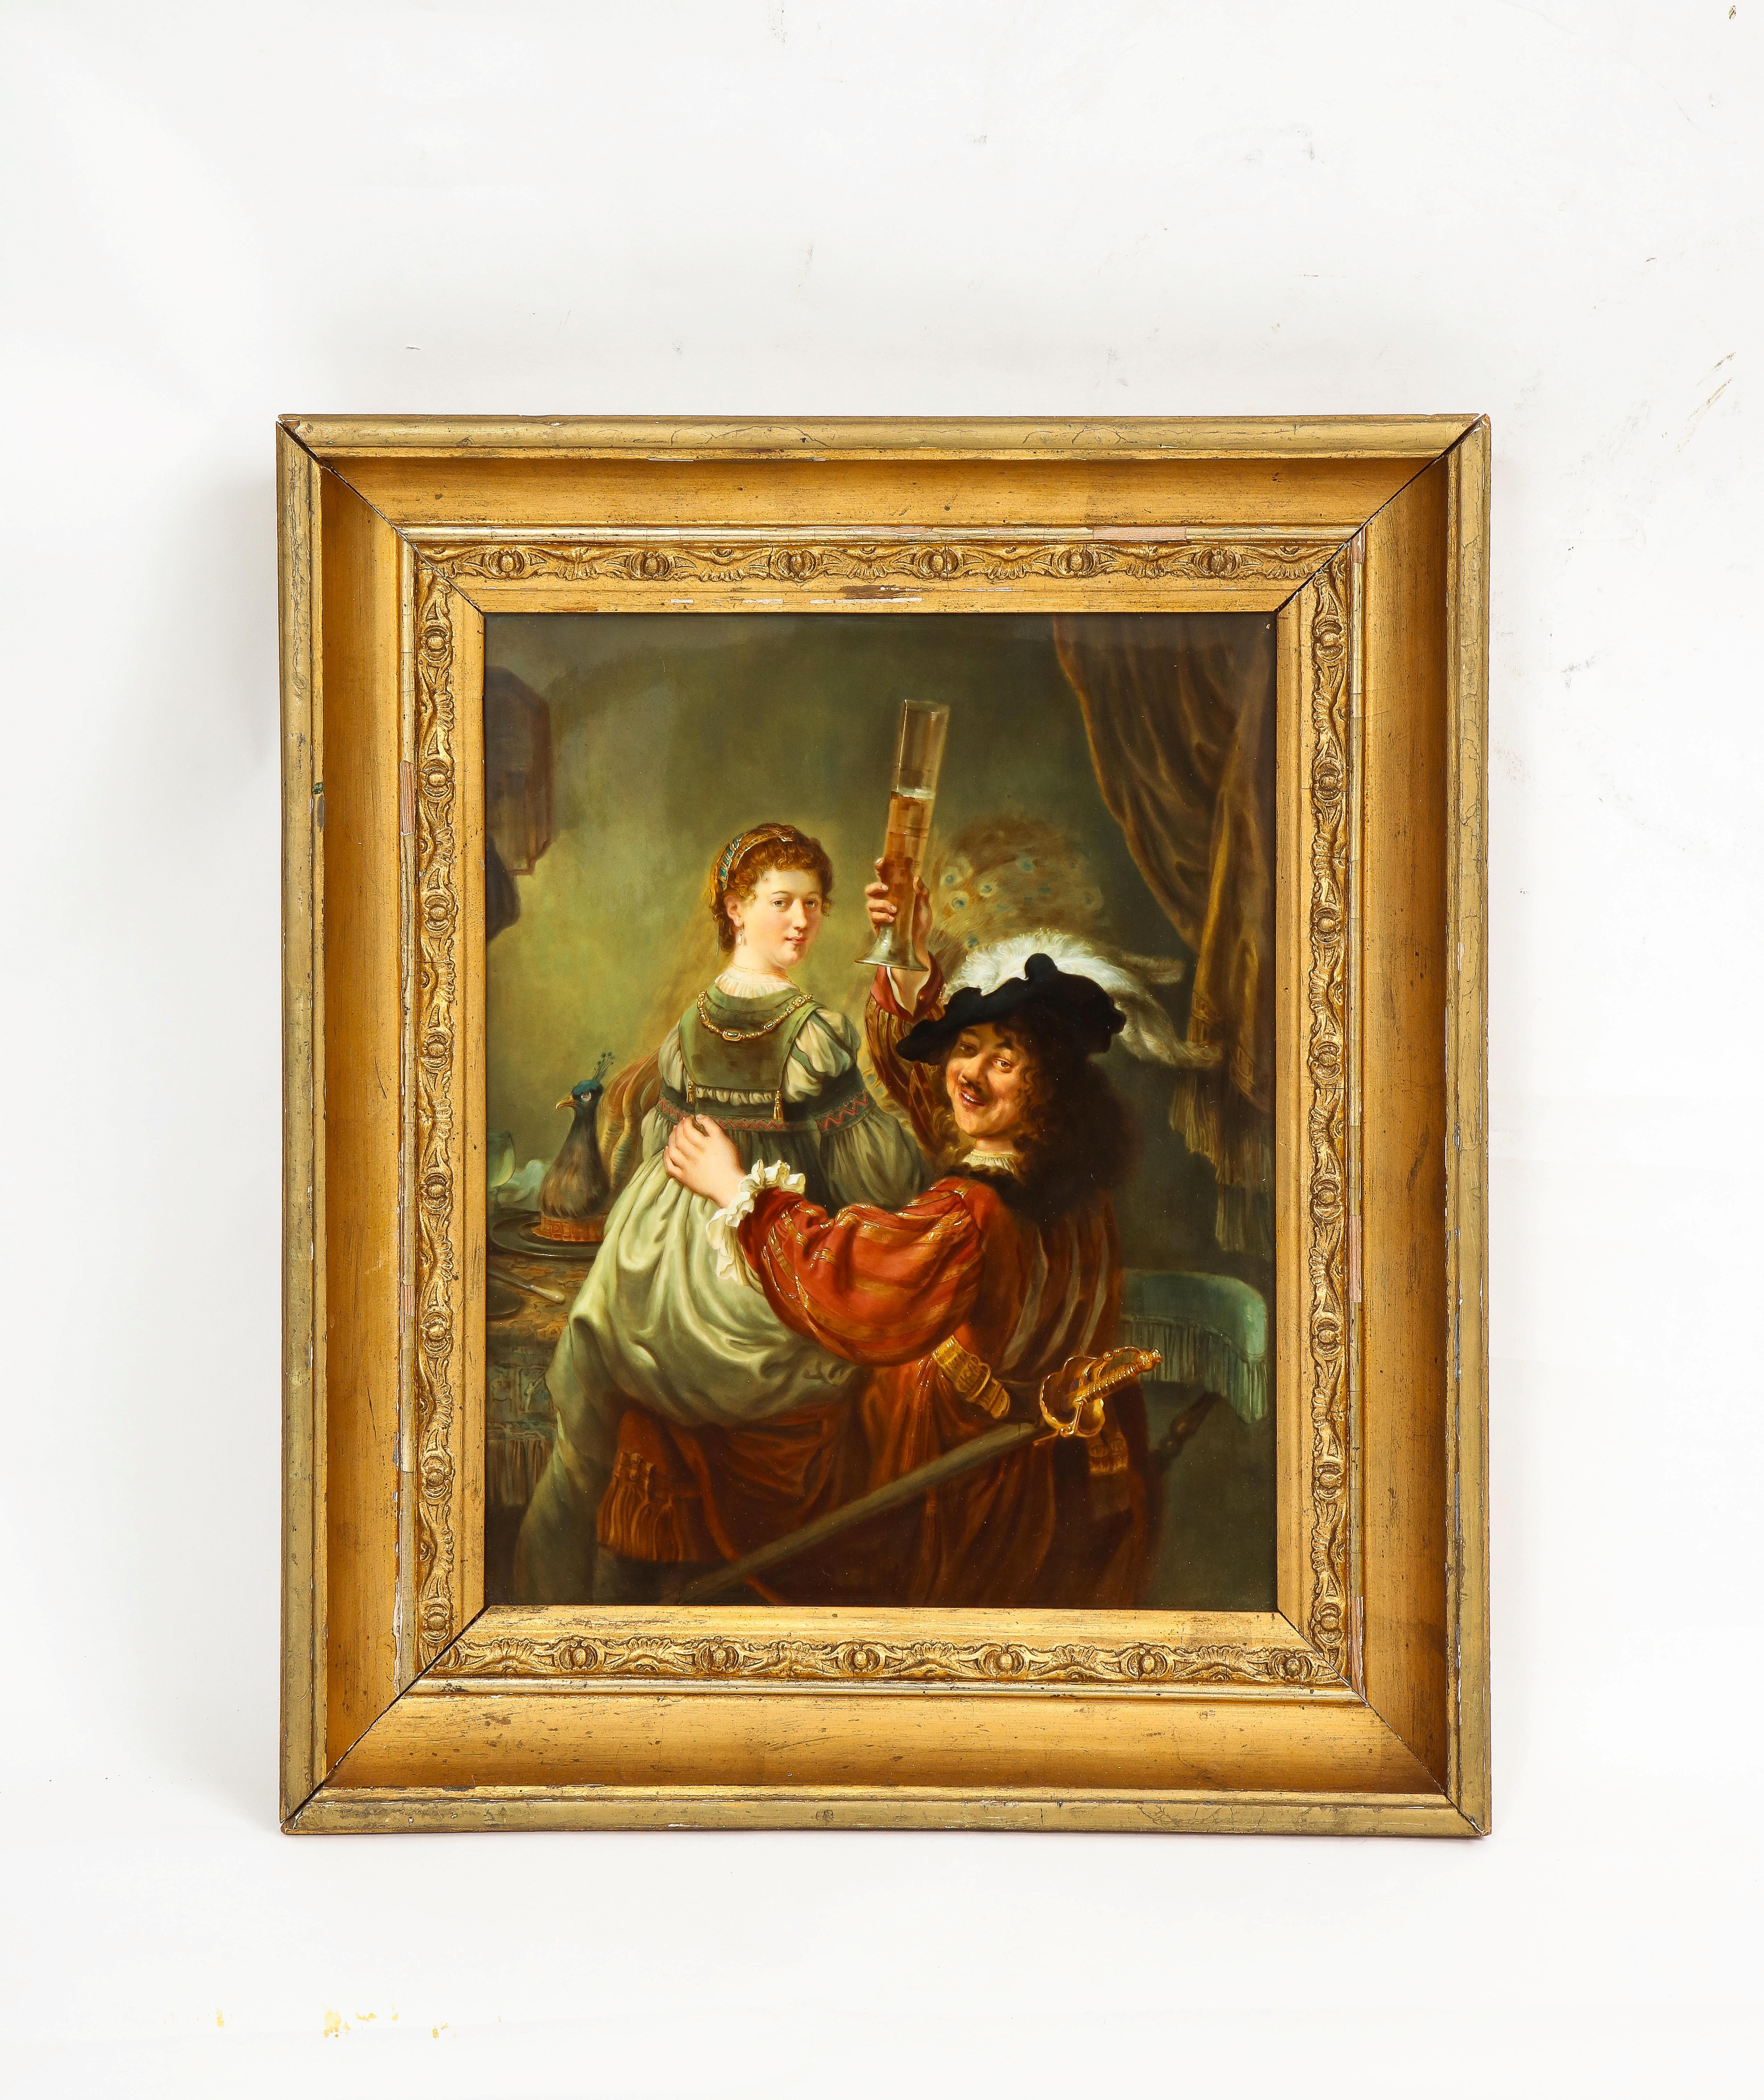 An incredible and very rare 19th Century Meissen porcelain plaque depicting Rembrandt and Saskia in the Tavern. Meissen plaques are incredibly rare and this subject is probably one of the rarest ever produced. The plaque is hand-painted by the best